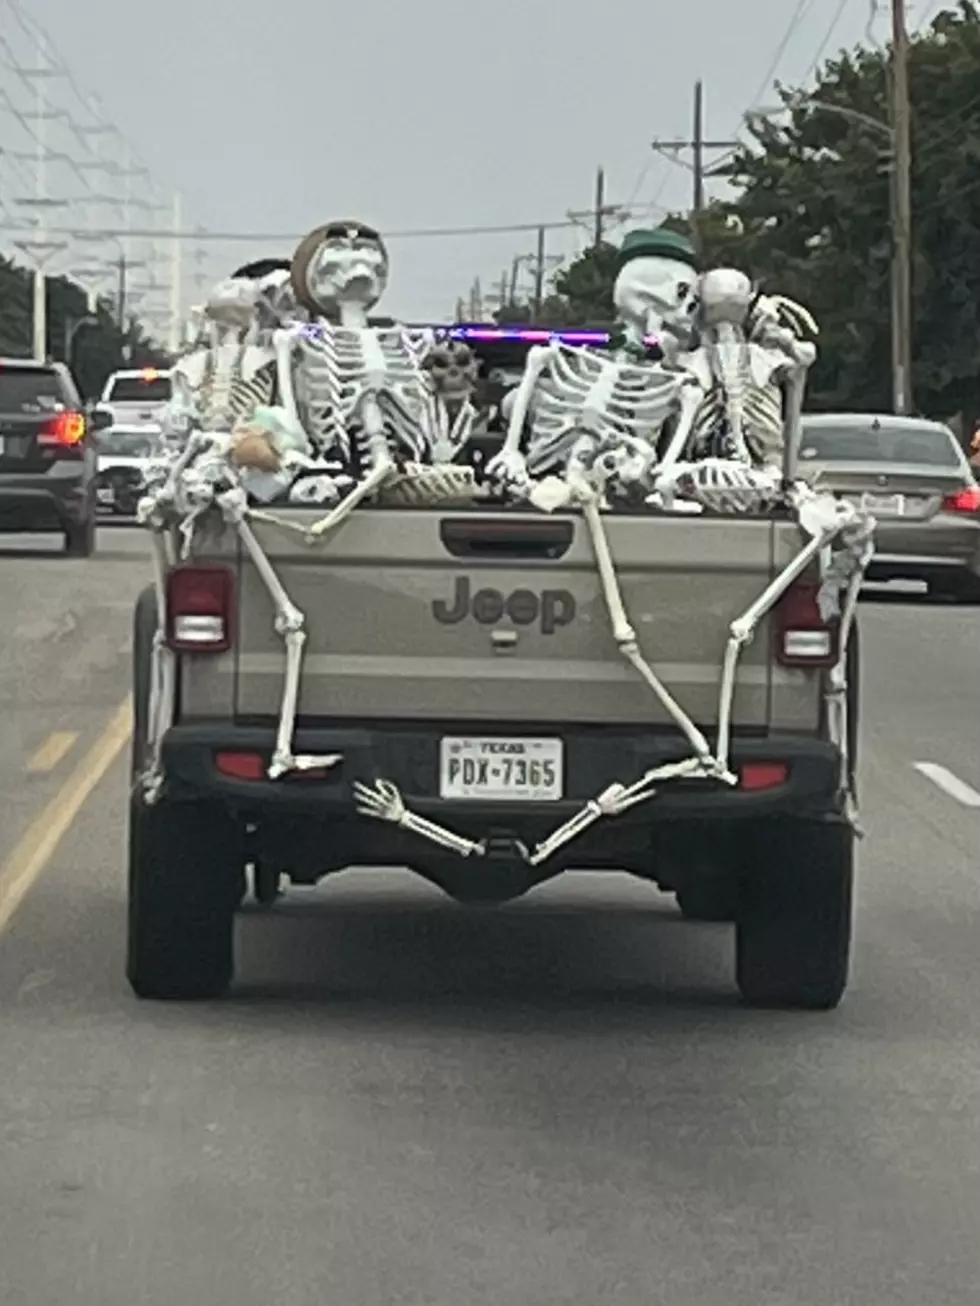 Have You Seen This Spooky Car Driving Around Lubbock?